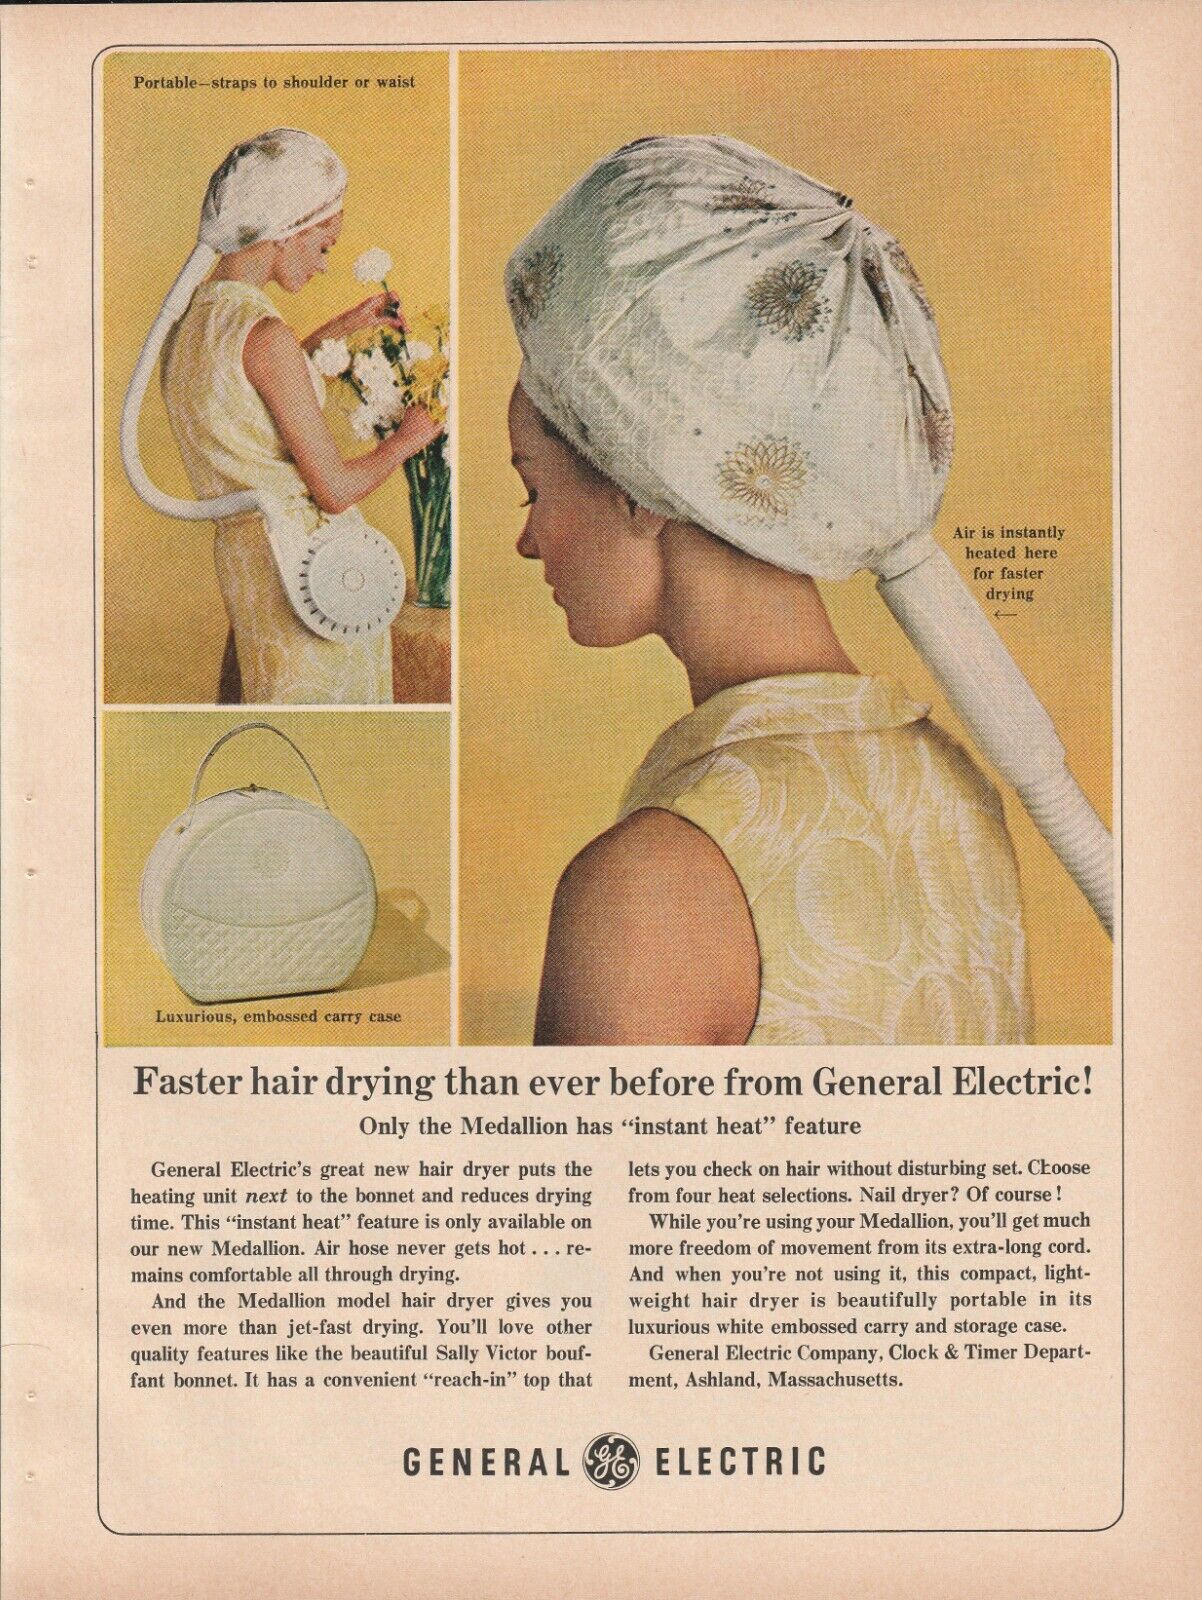 1964 General Electric Print Ad 1960s Faster Hair Drying Than Ever Before